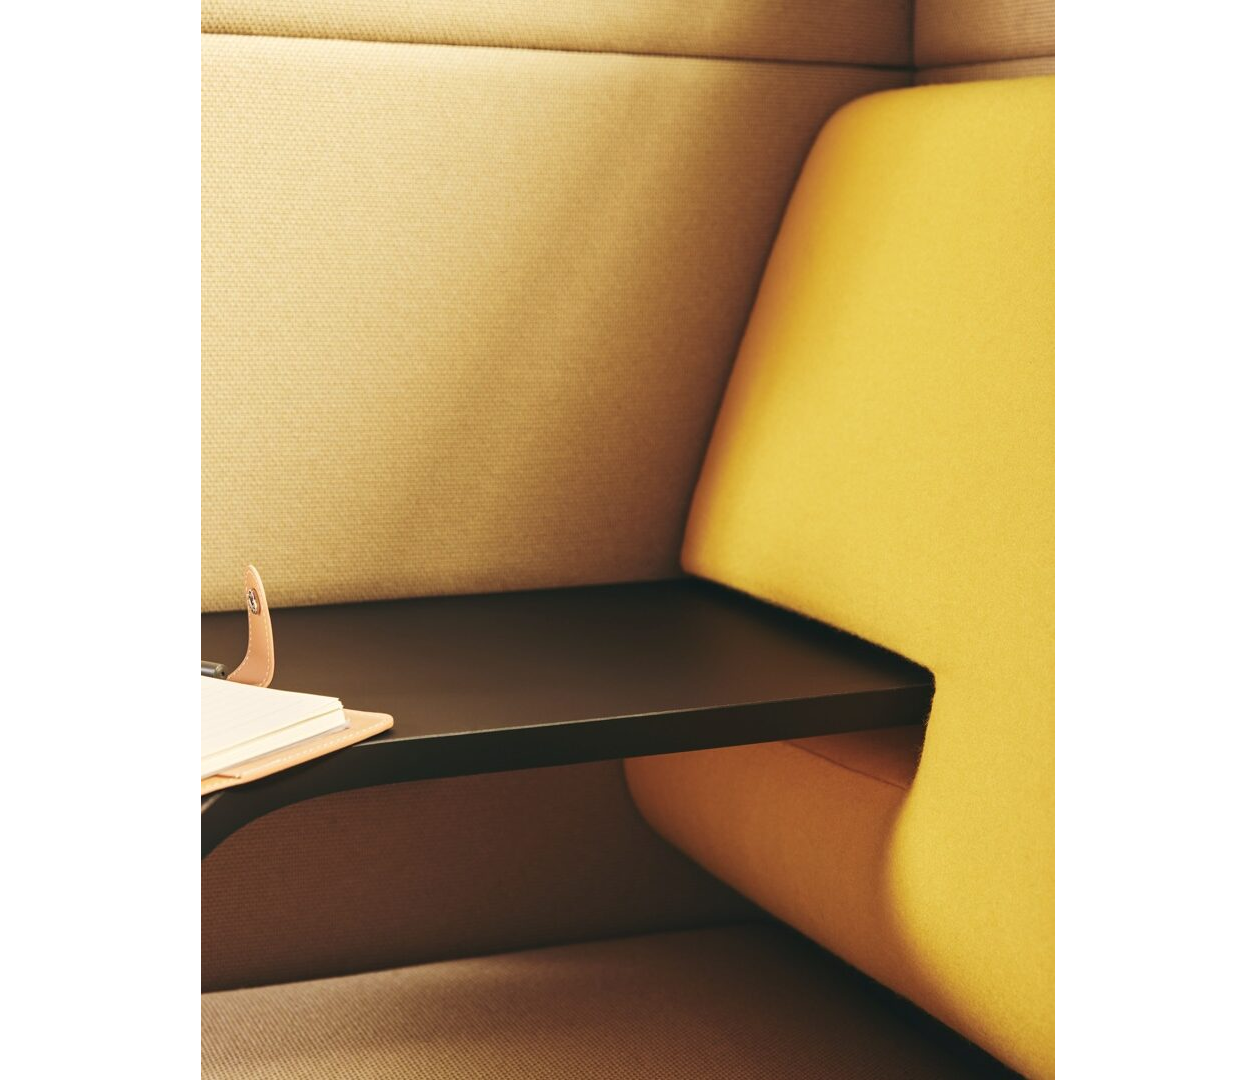 OCEE_FOUR – Work _ Study Booths – FourUs Solo – Details Image 1 Large